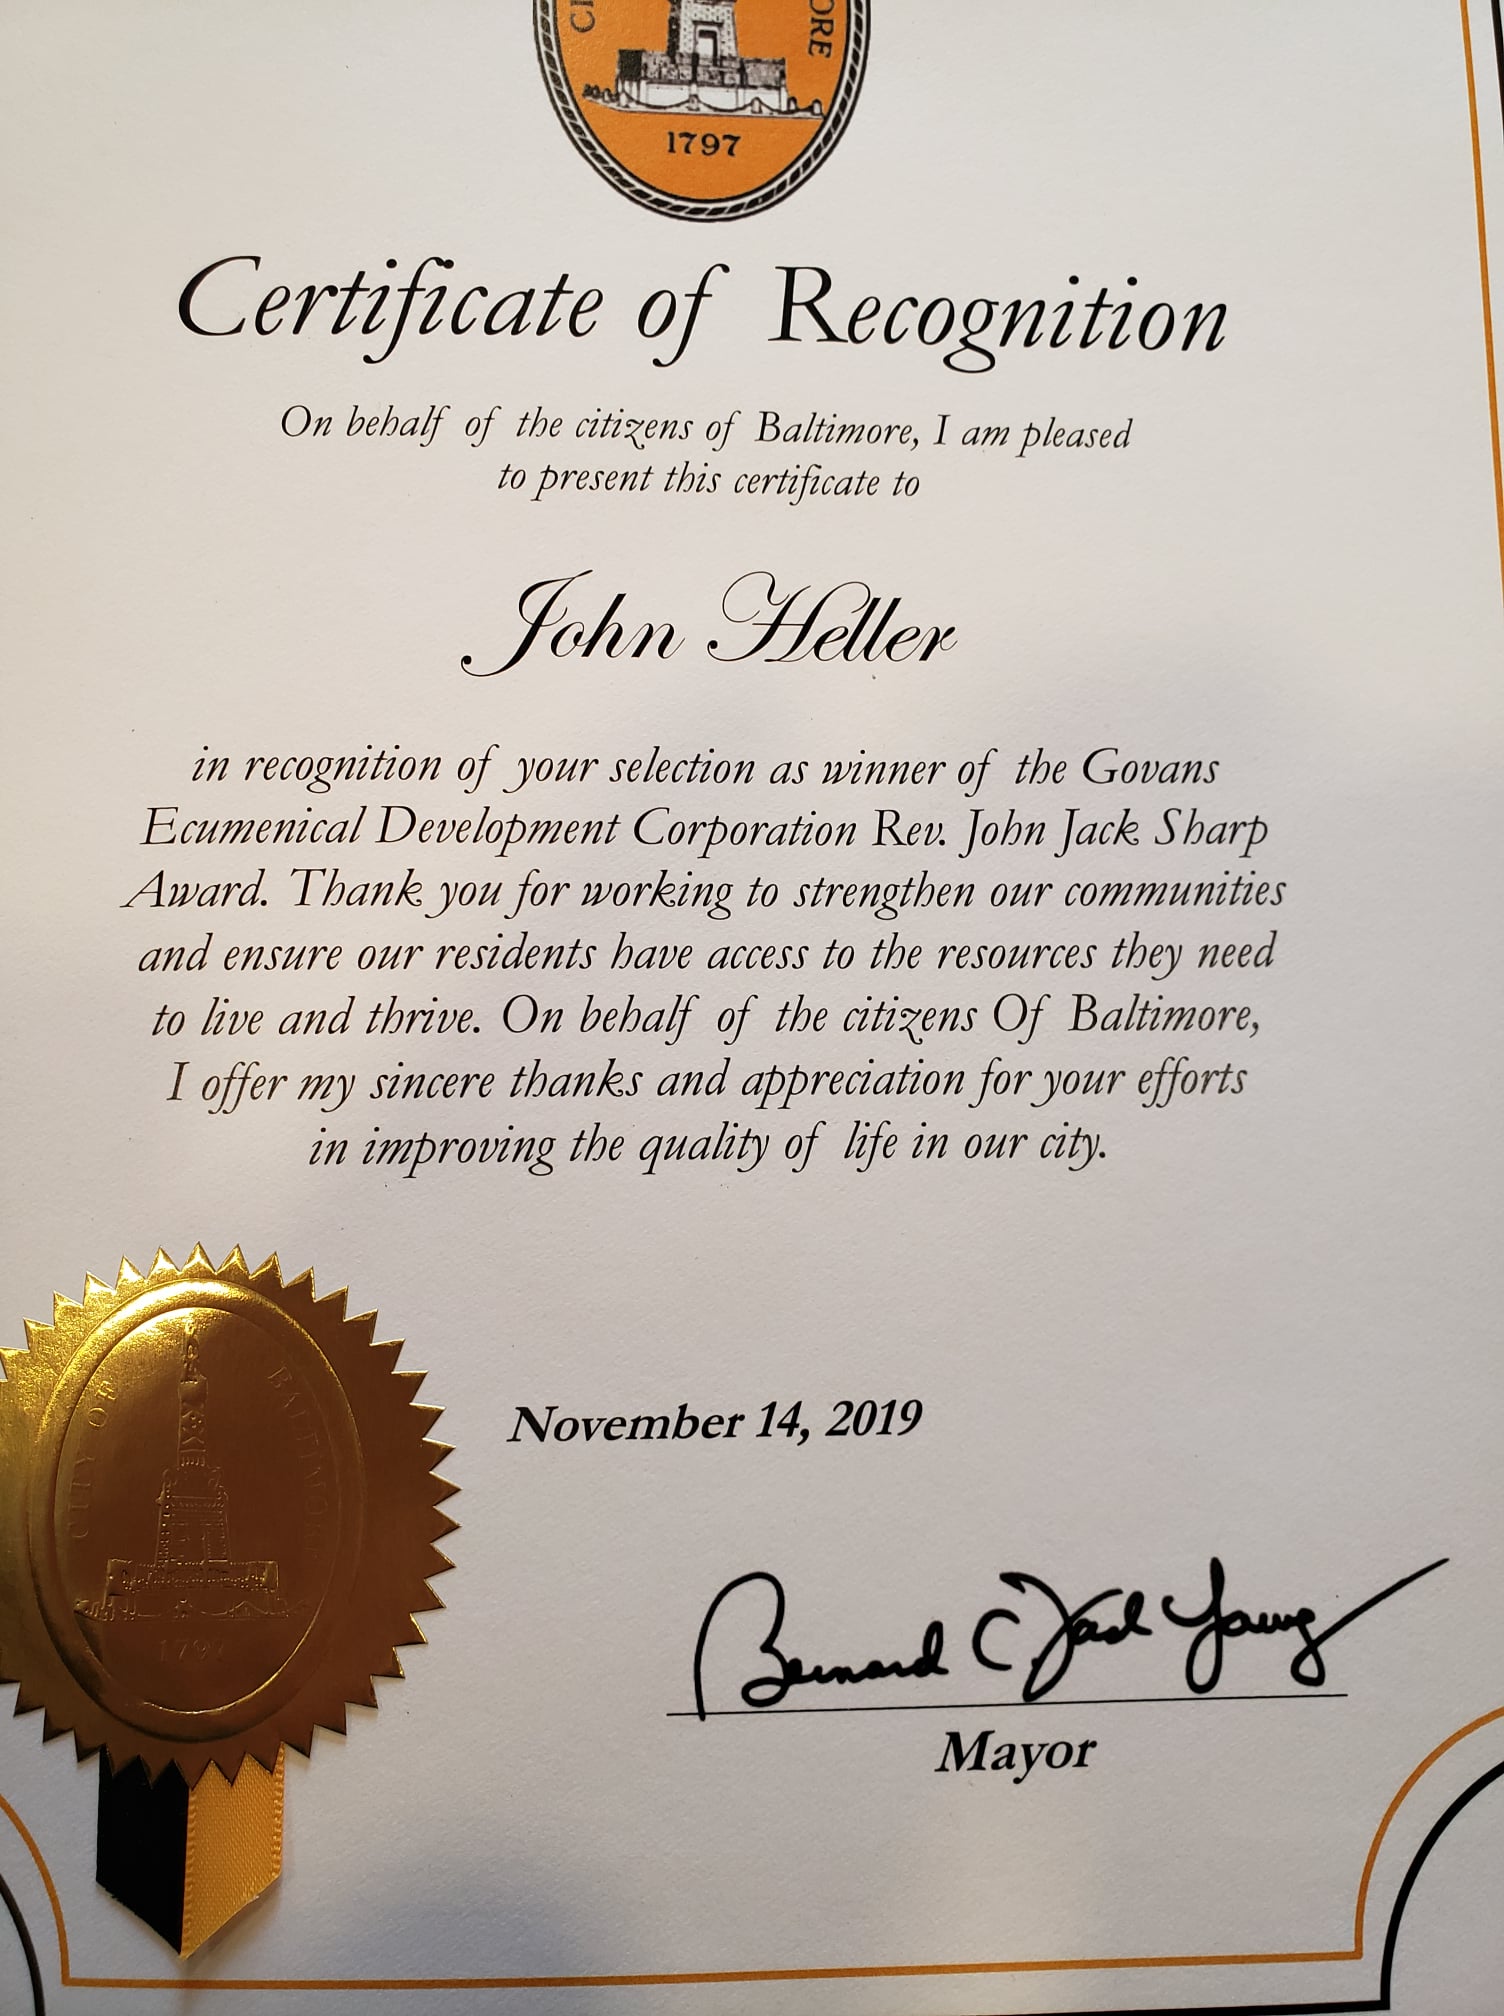 Certificate of Recognition to John Heller from The City of Baltimore